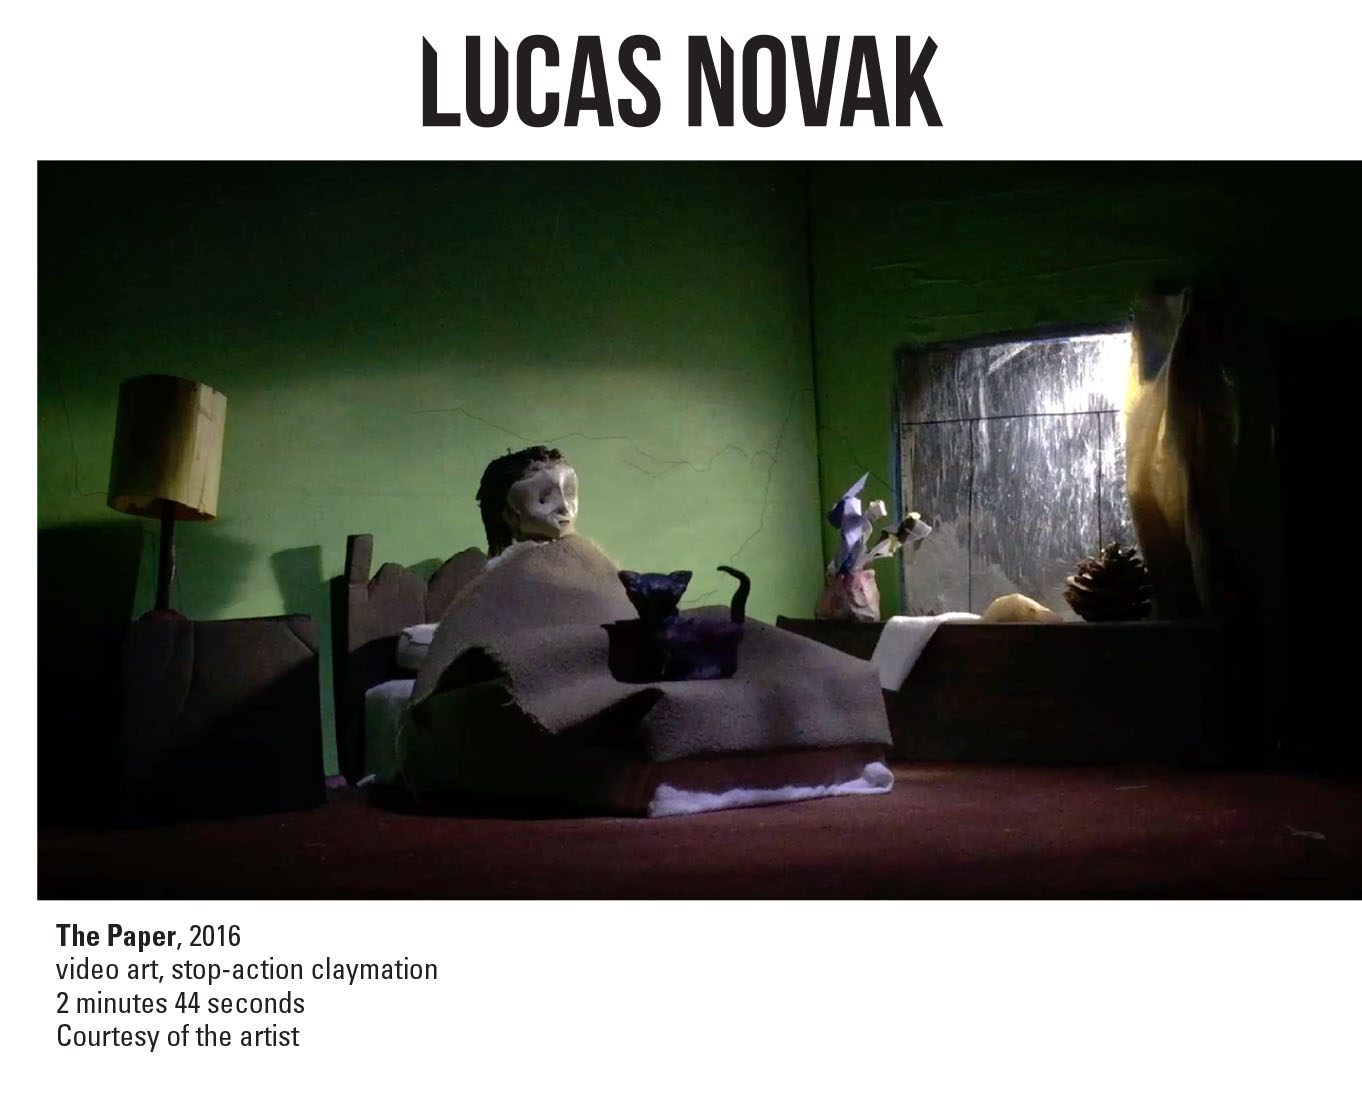 Lucans Novak, The Paper, 2016. Video art, stop-action claymation, 2 minutes 44 seconds. Courtesy of the artist. A scene from a claymation of a person in bed looking out a window